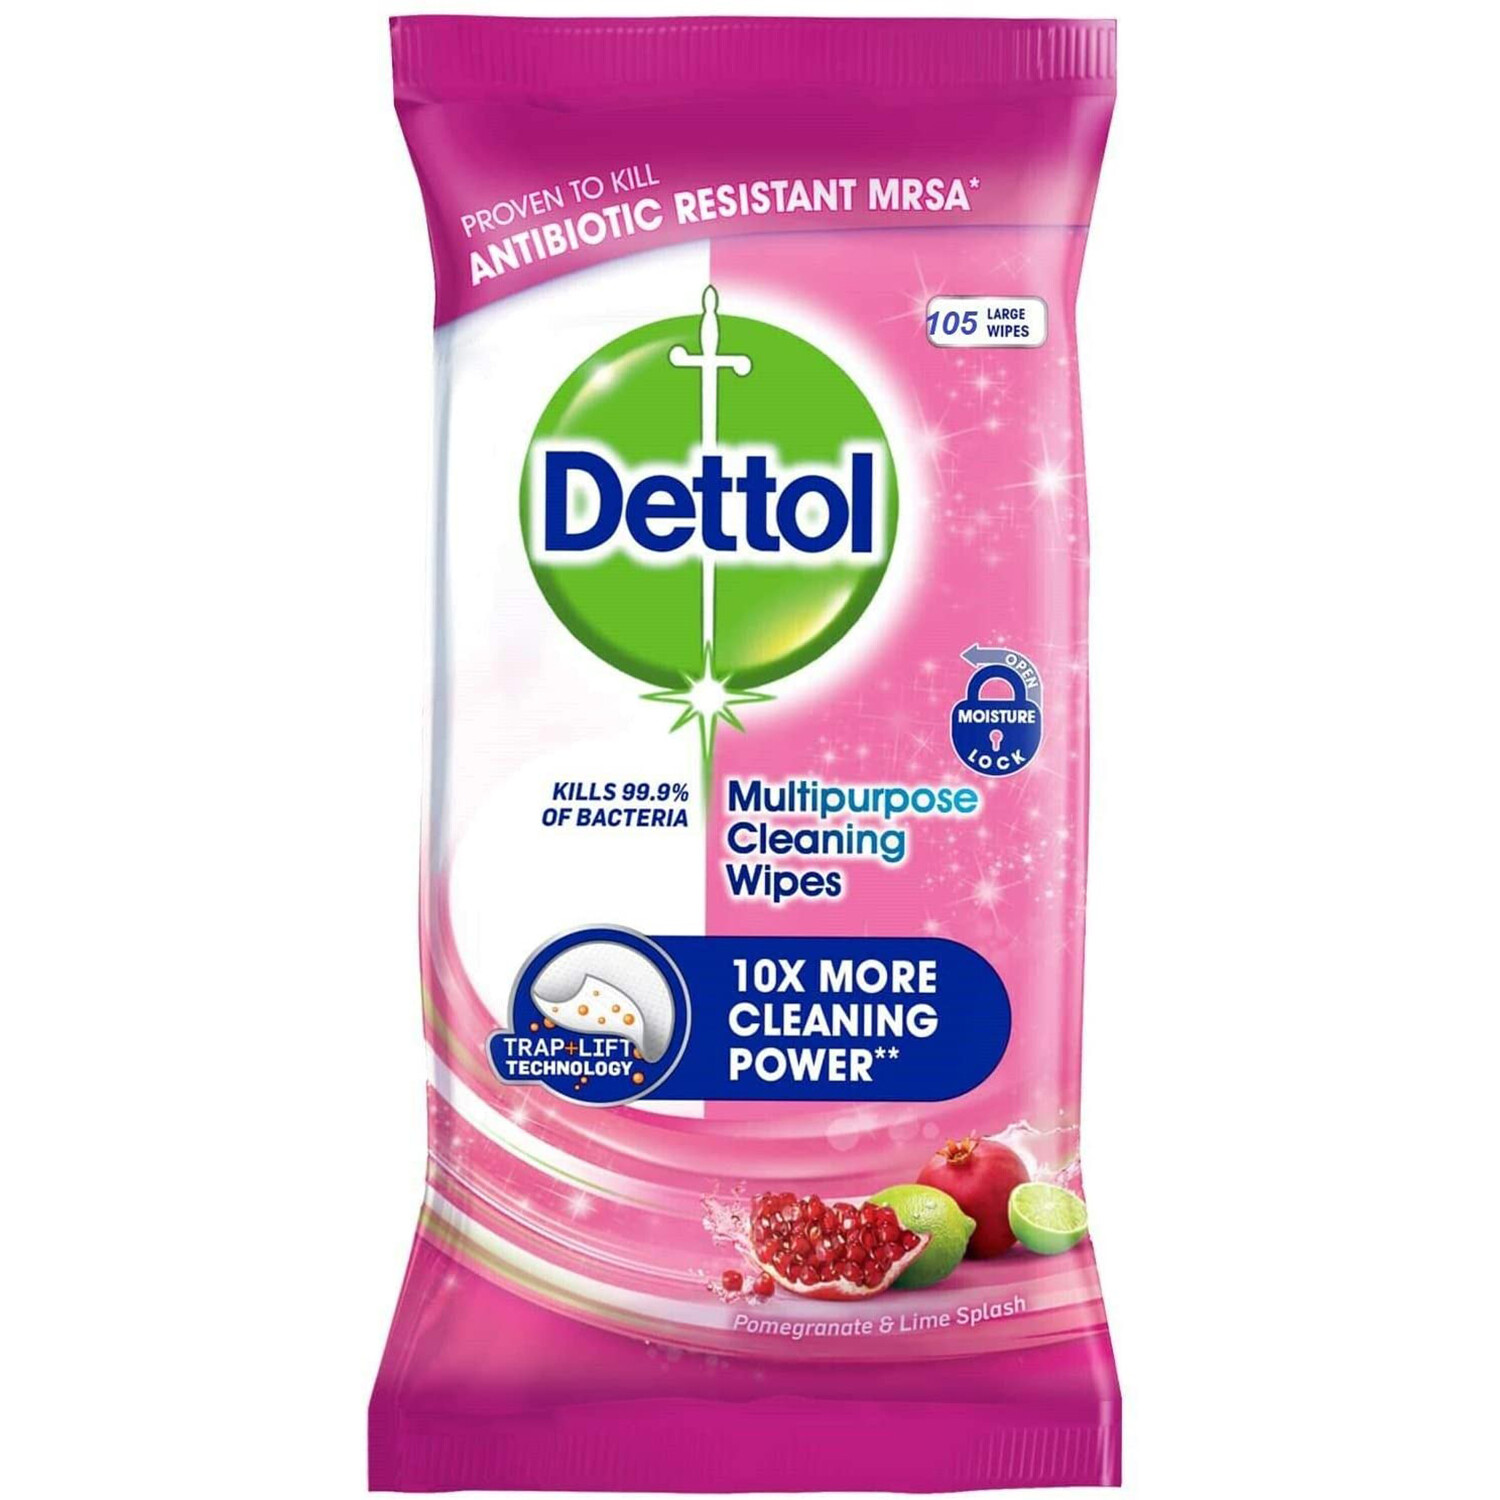 Dettol Pomegranate Multipurpose Cleaning Wipes 105 Pack Image